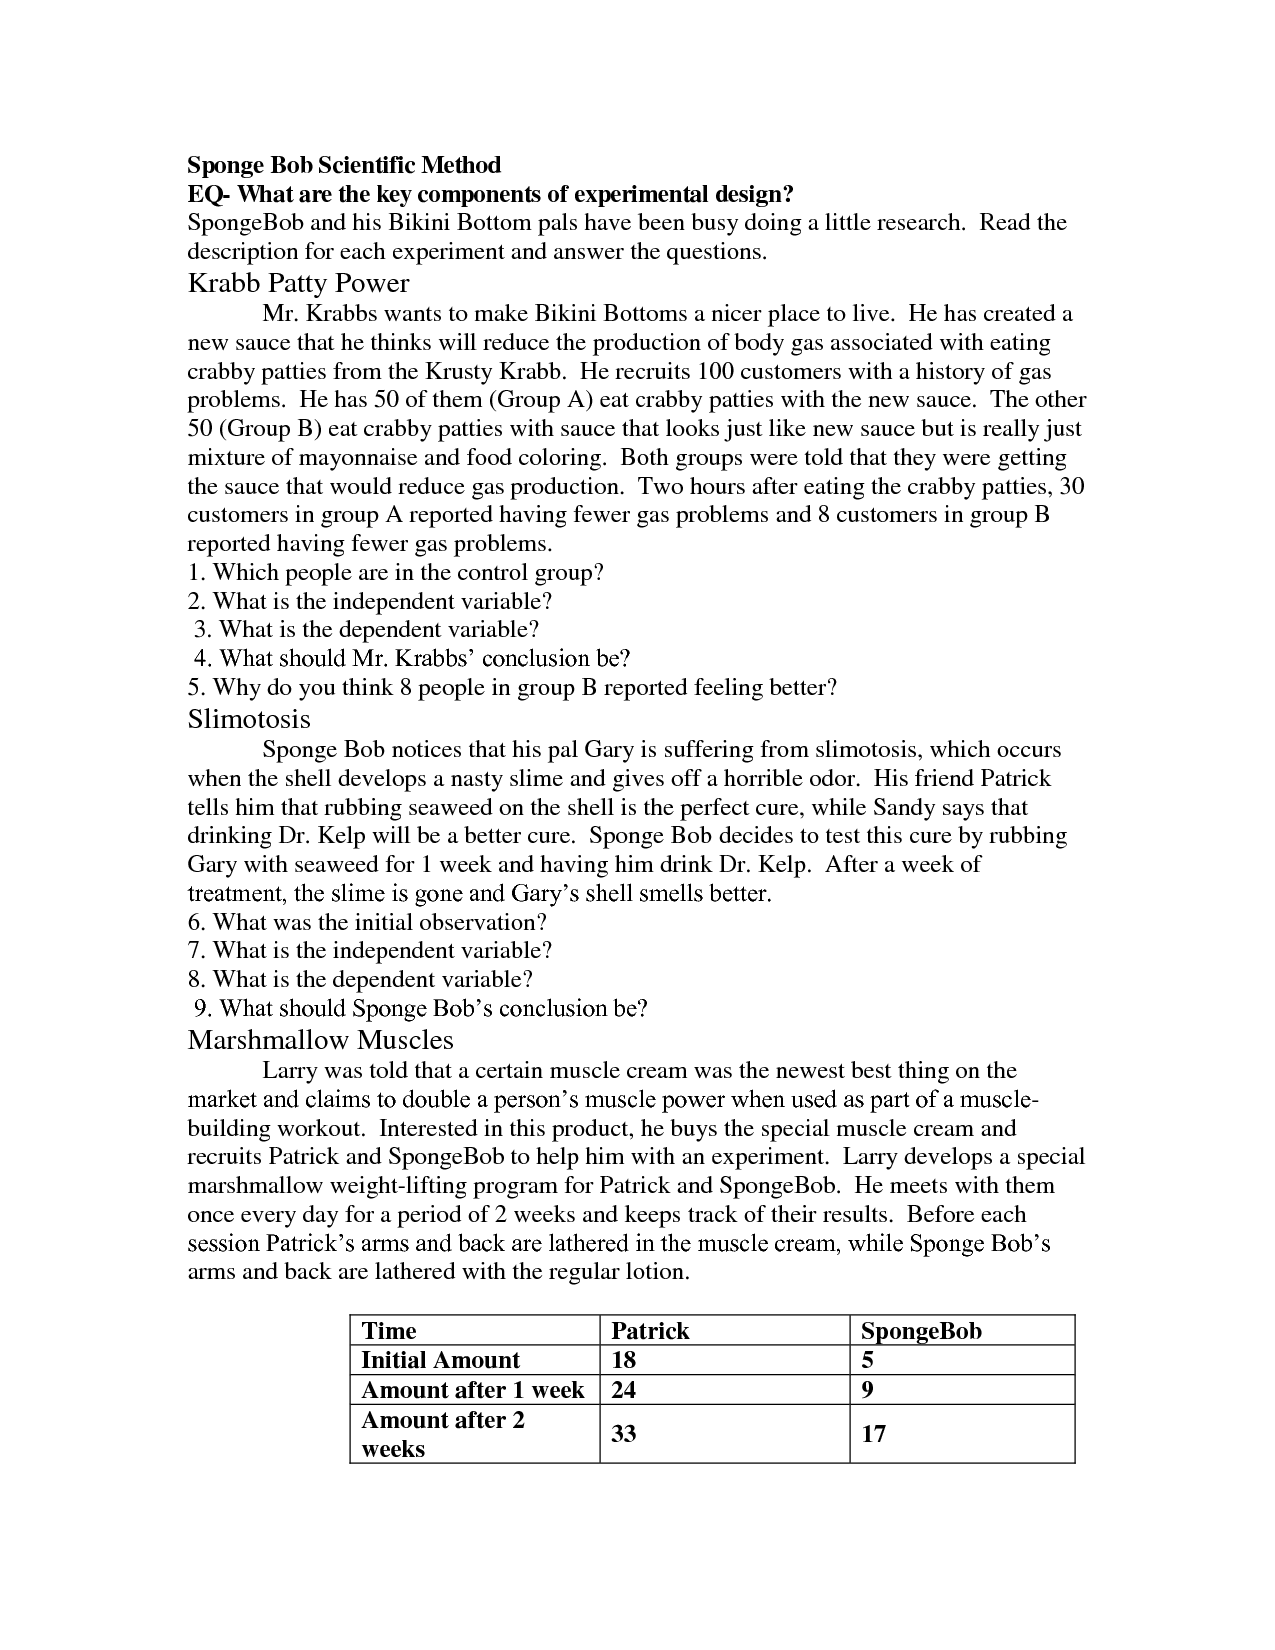 14 Best Images of Experimental Design Worksheet Answer Key - Mitosis